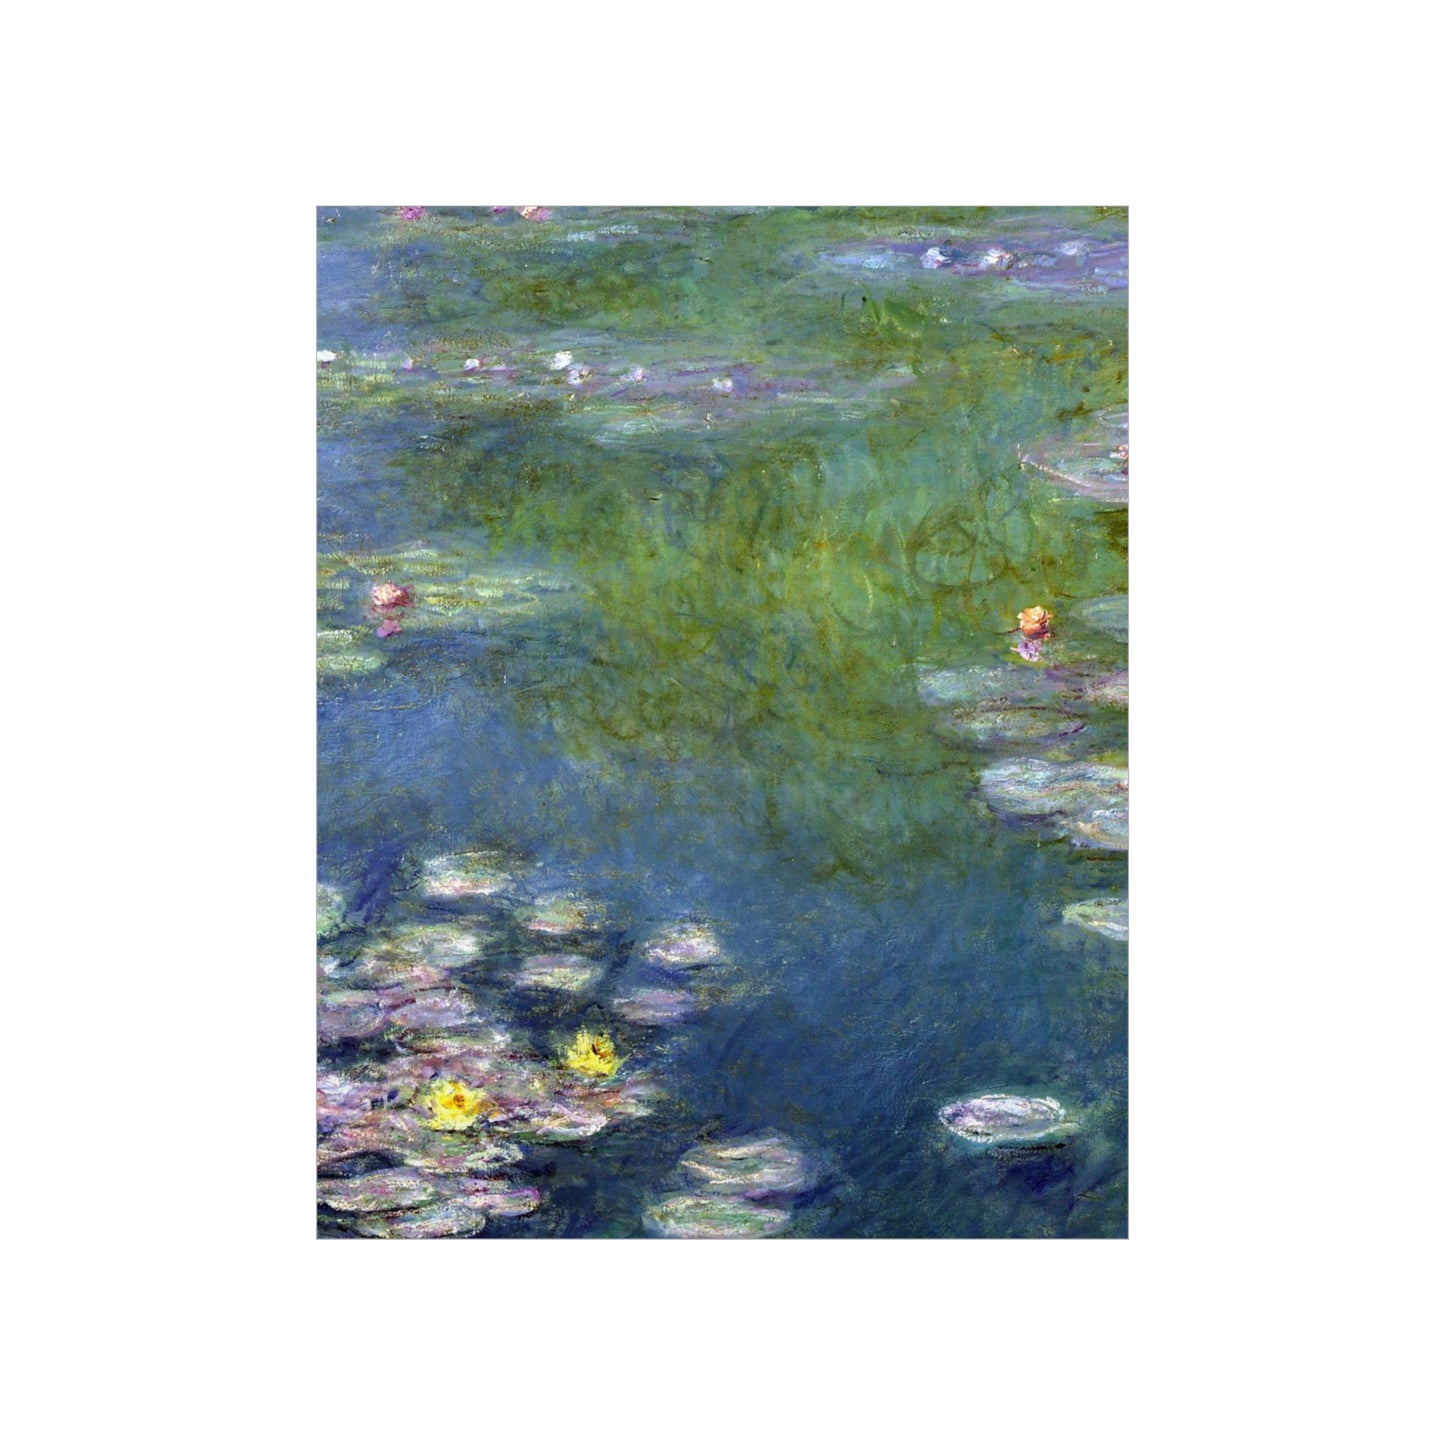 "Captivating Beauty: Monet's Water Lilies Premium Matte Vertical Posters - A Splash of Nature on Your Wall!"Water Lilies Monet Premium Matte Vertical Posters*